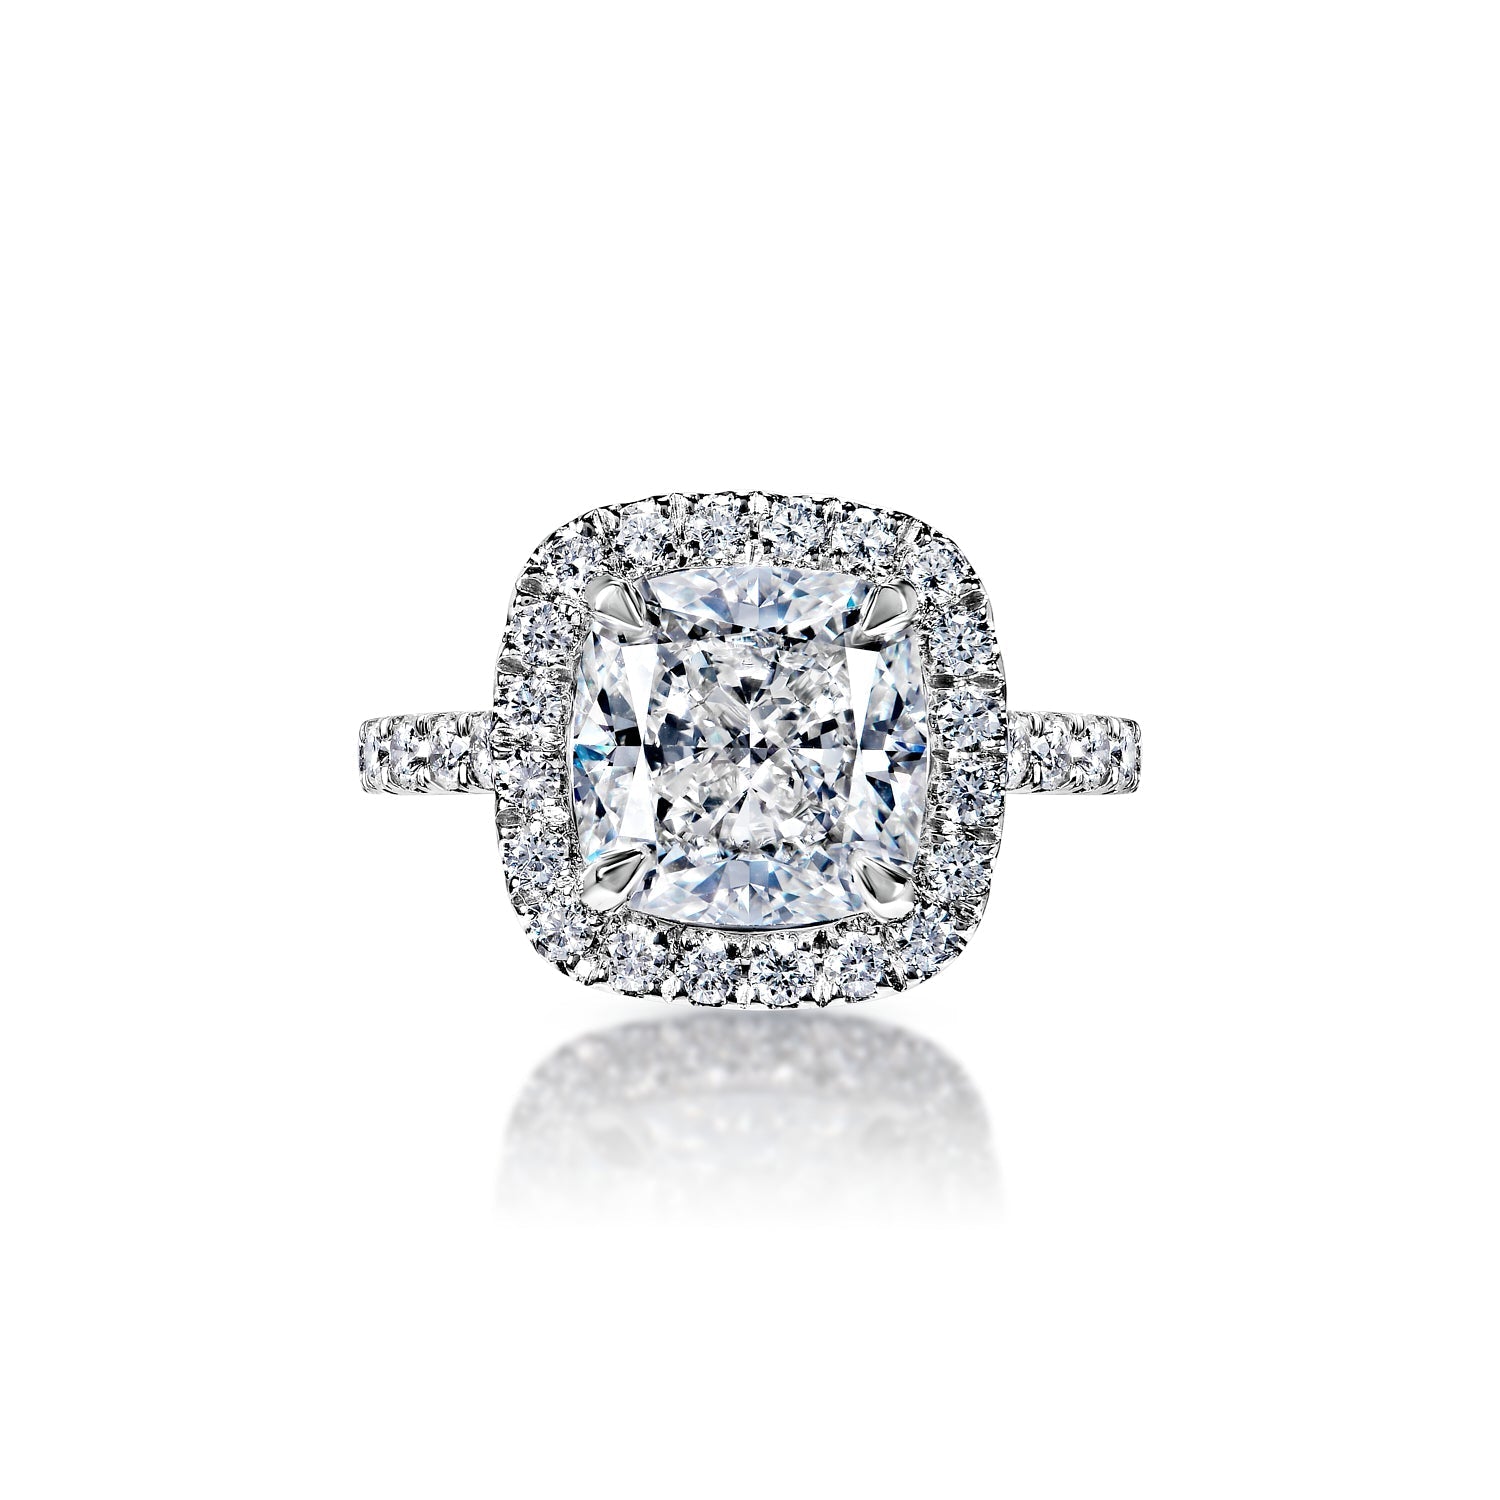 Jayleen 6 Carat I IF Cushion Cut Diamond Engagement Ring in 18k White Gold Front View